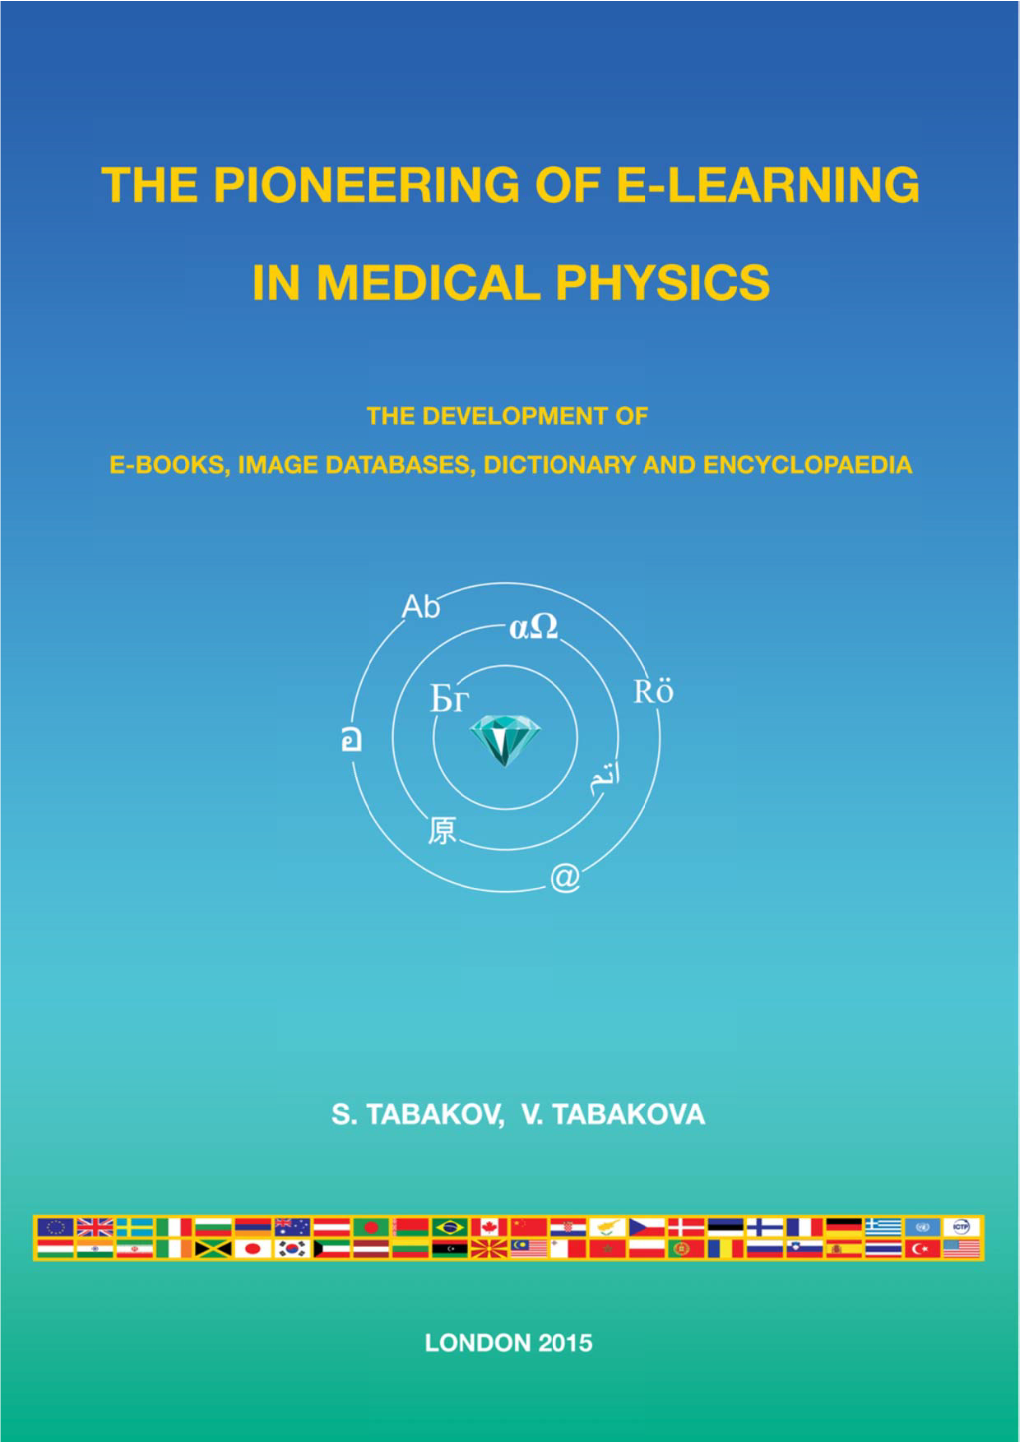 The Pioneering of E-Learning in Medical Physics